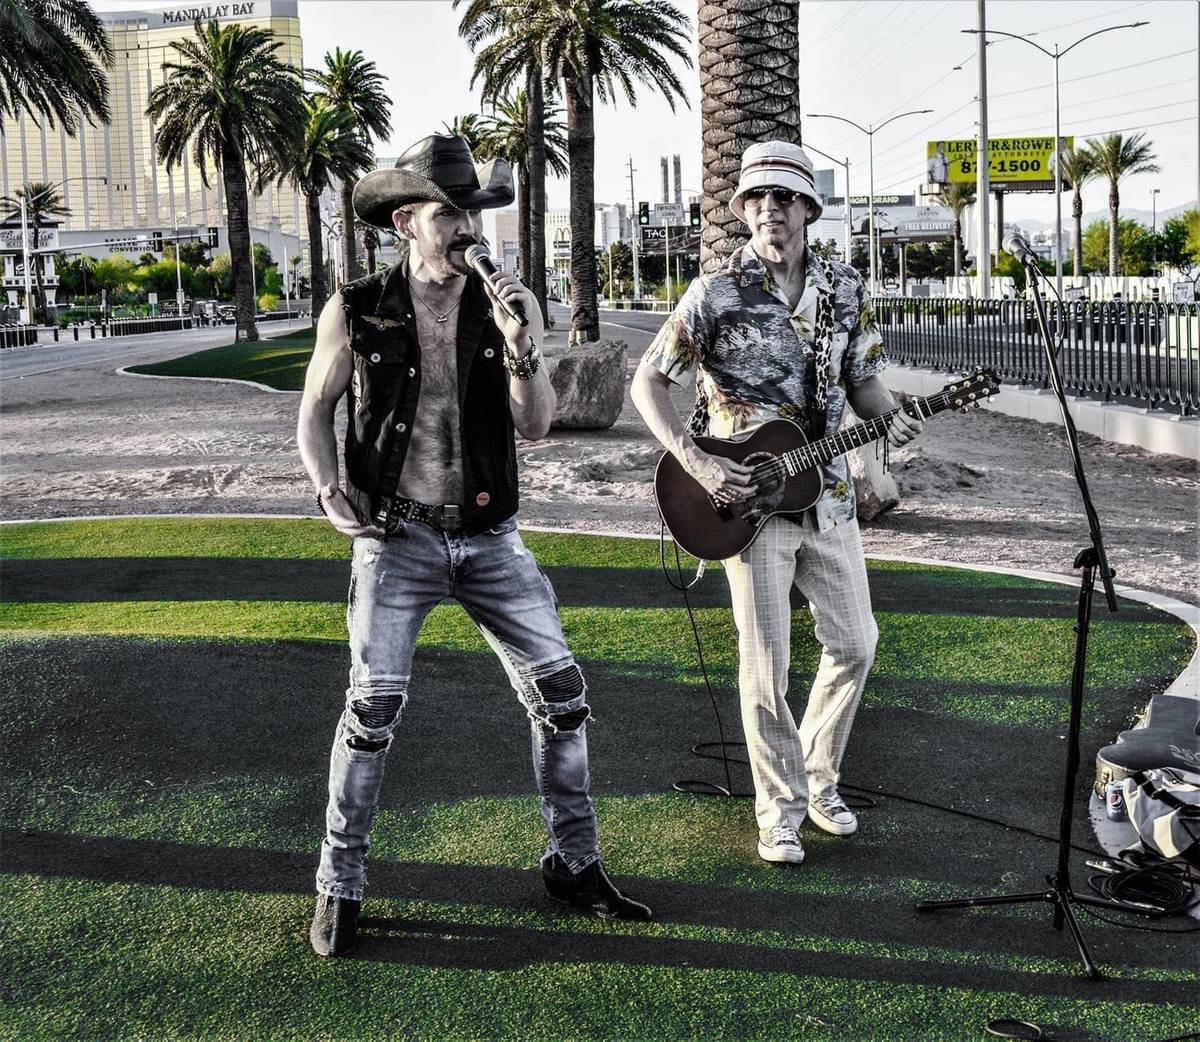 Country artist Chase Brown and guitarist Glen McCallum are shown at the Welcome to Las Vegas Si ...